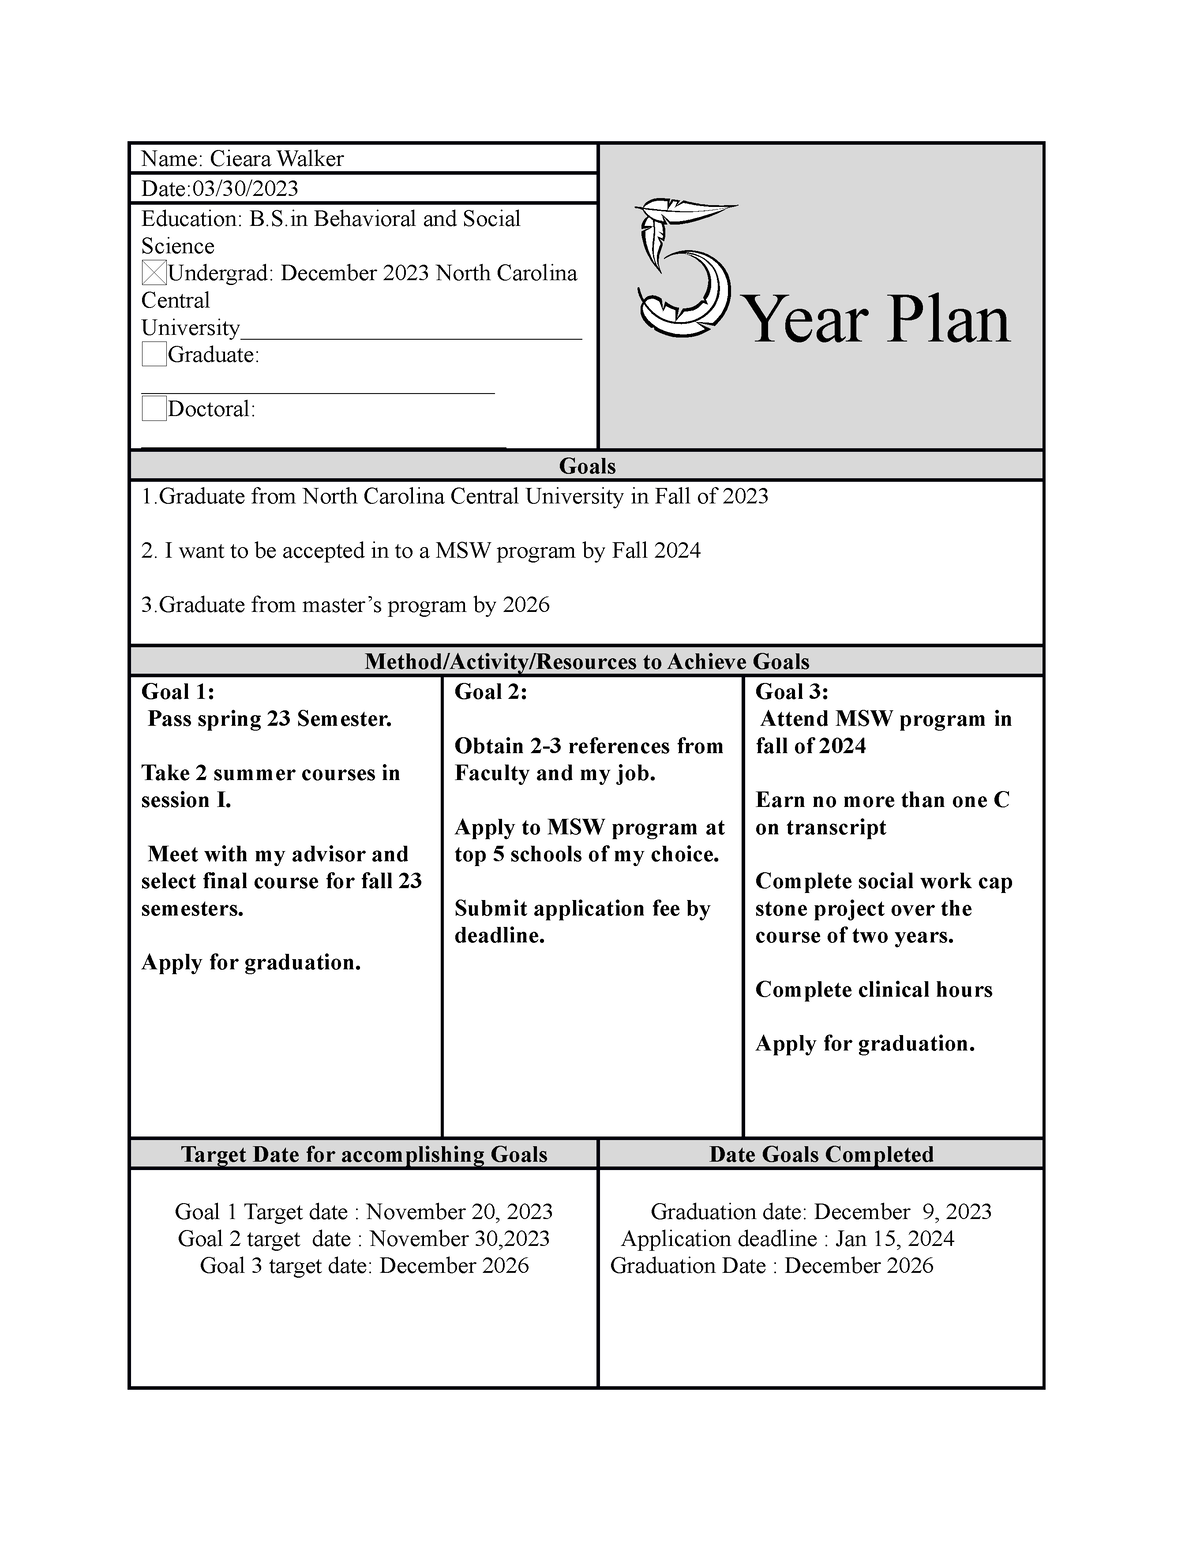 5 year plan Completed 5year plan example. This assignment is a